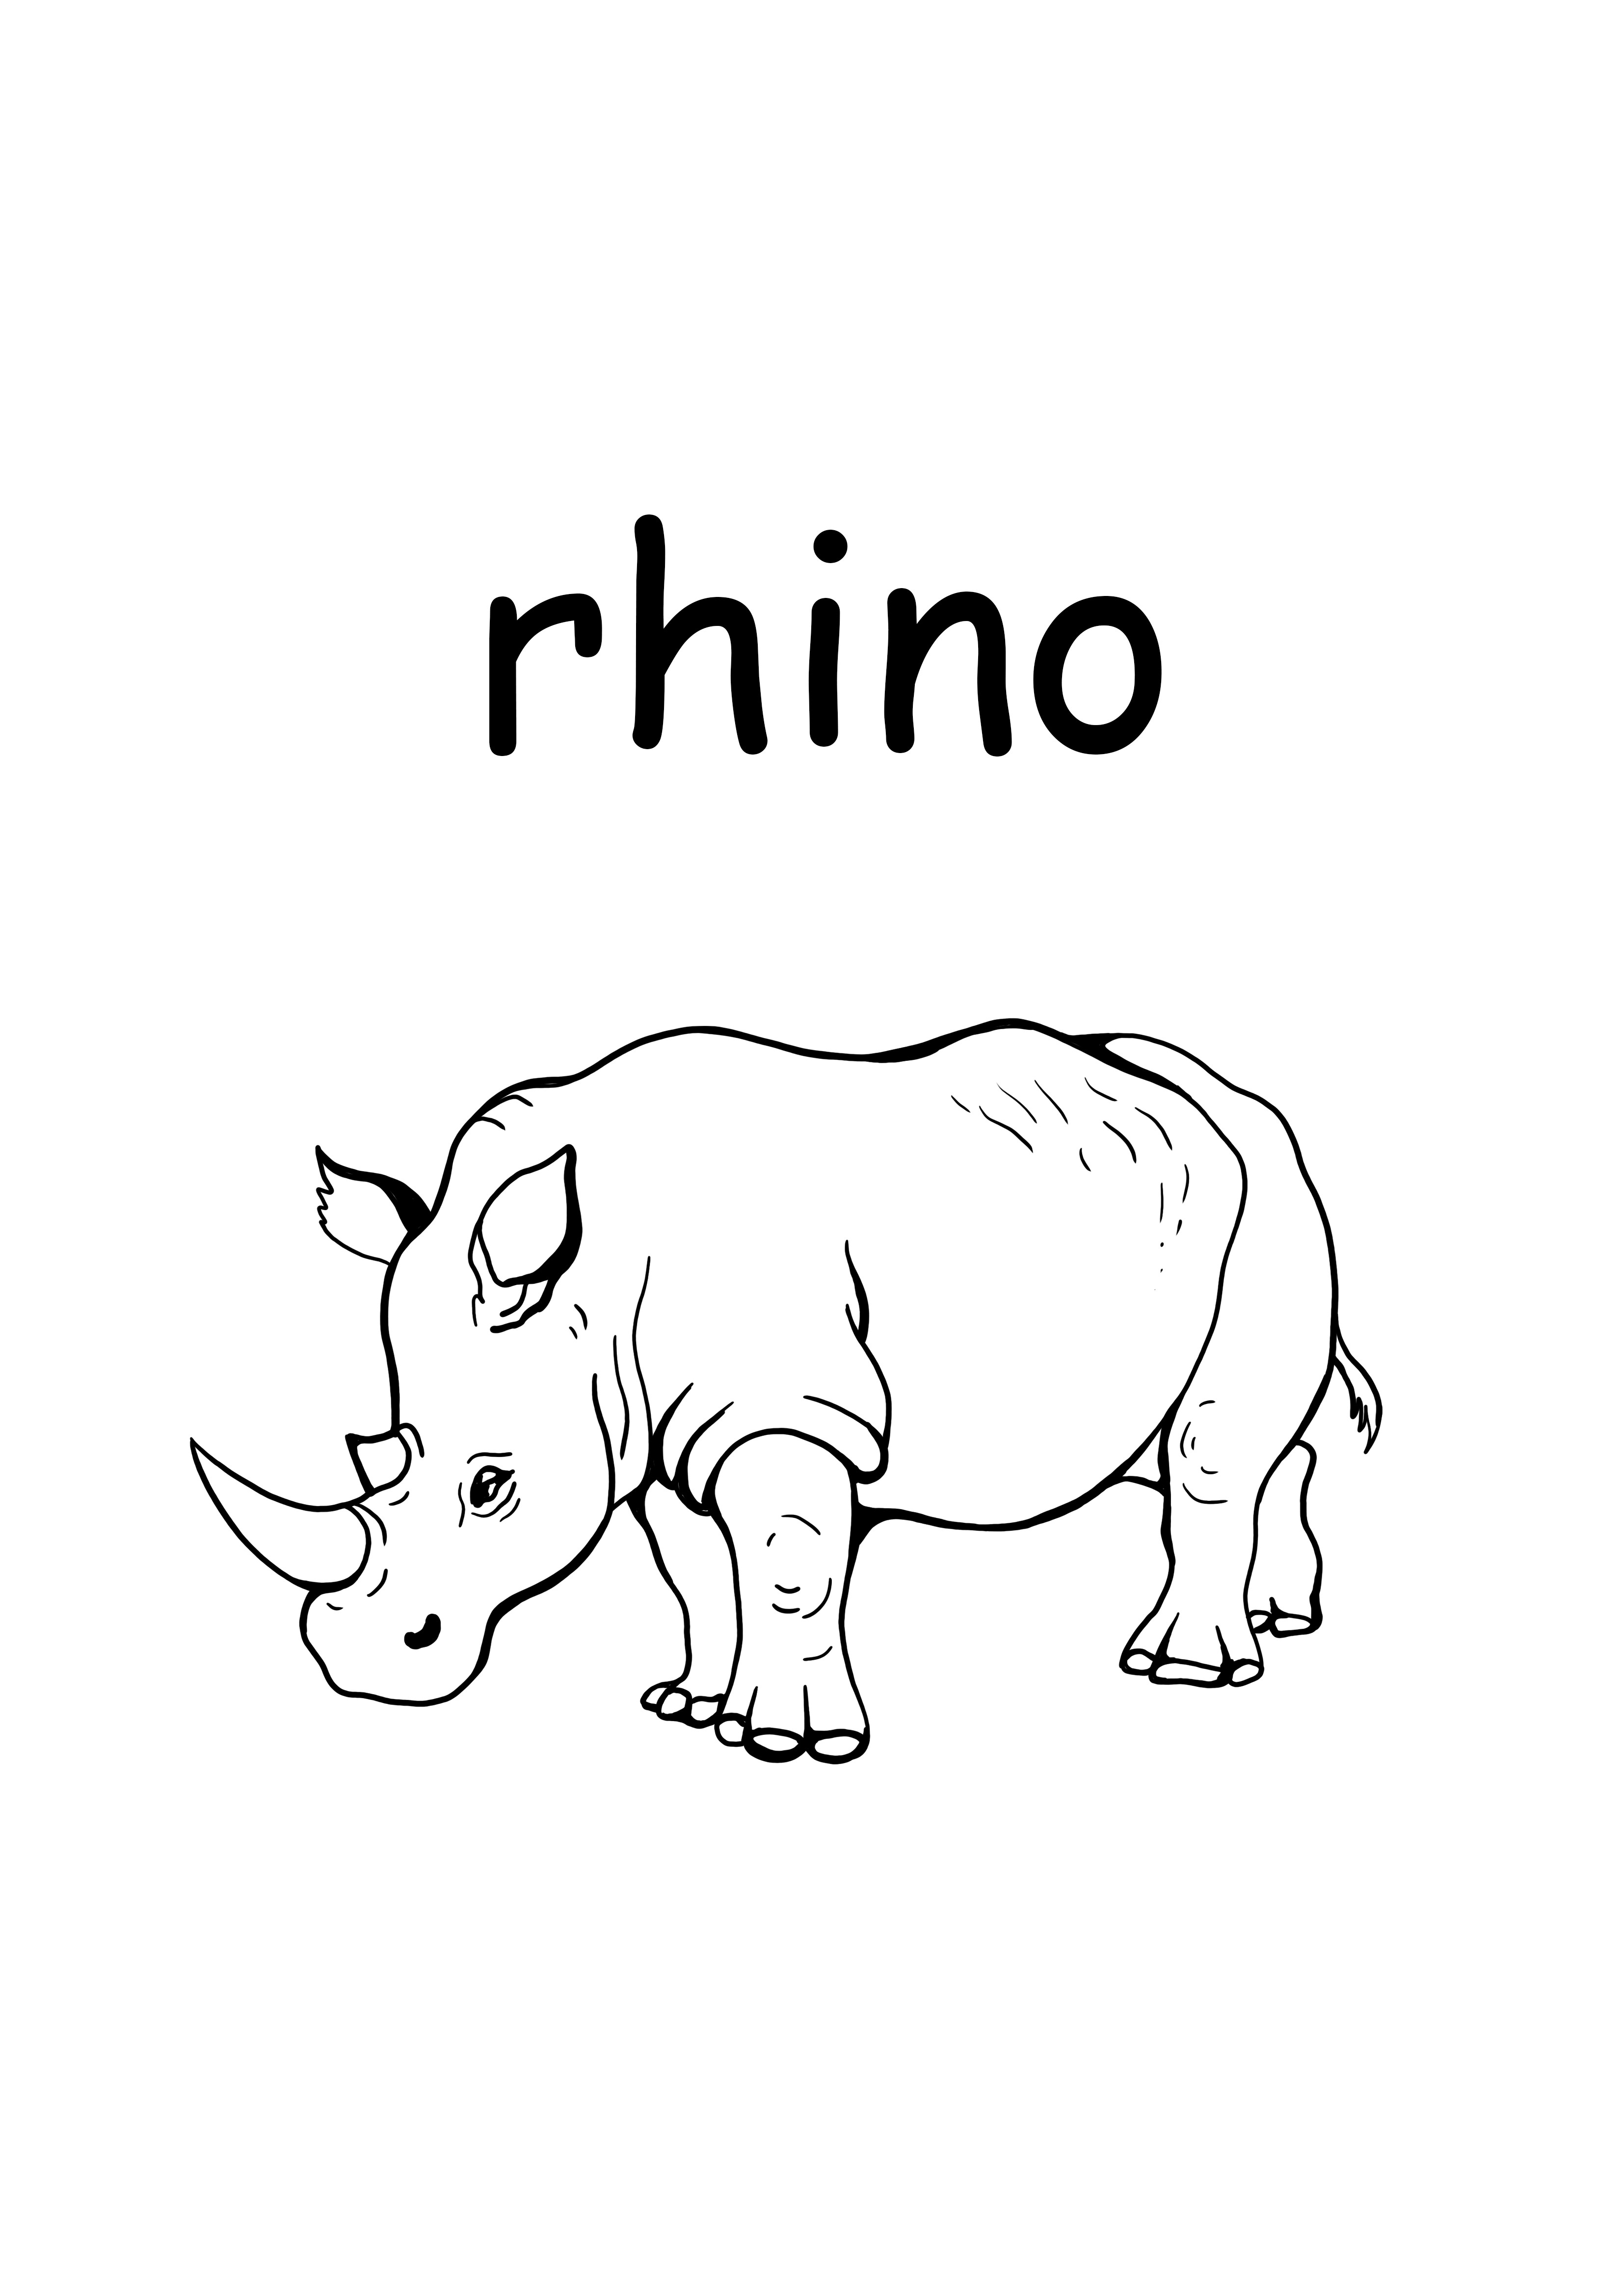 r for rhino lower case word coloring page for free